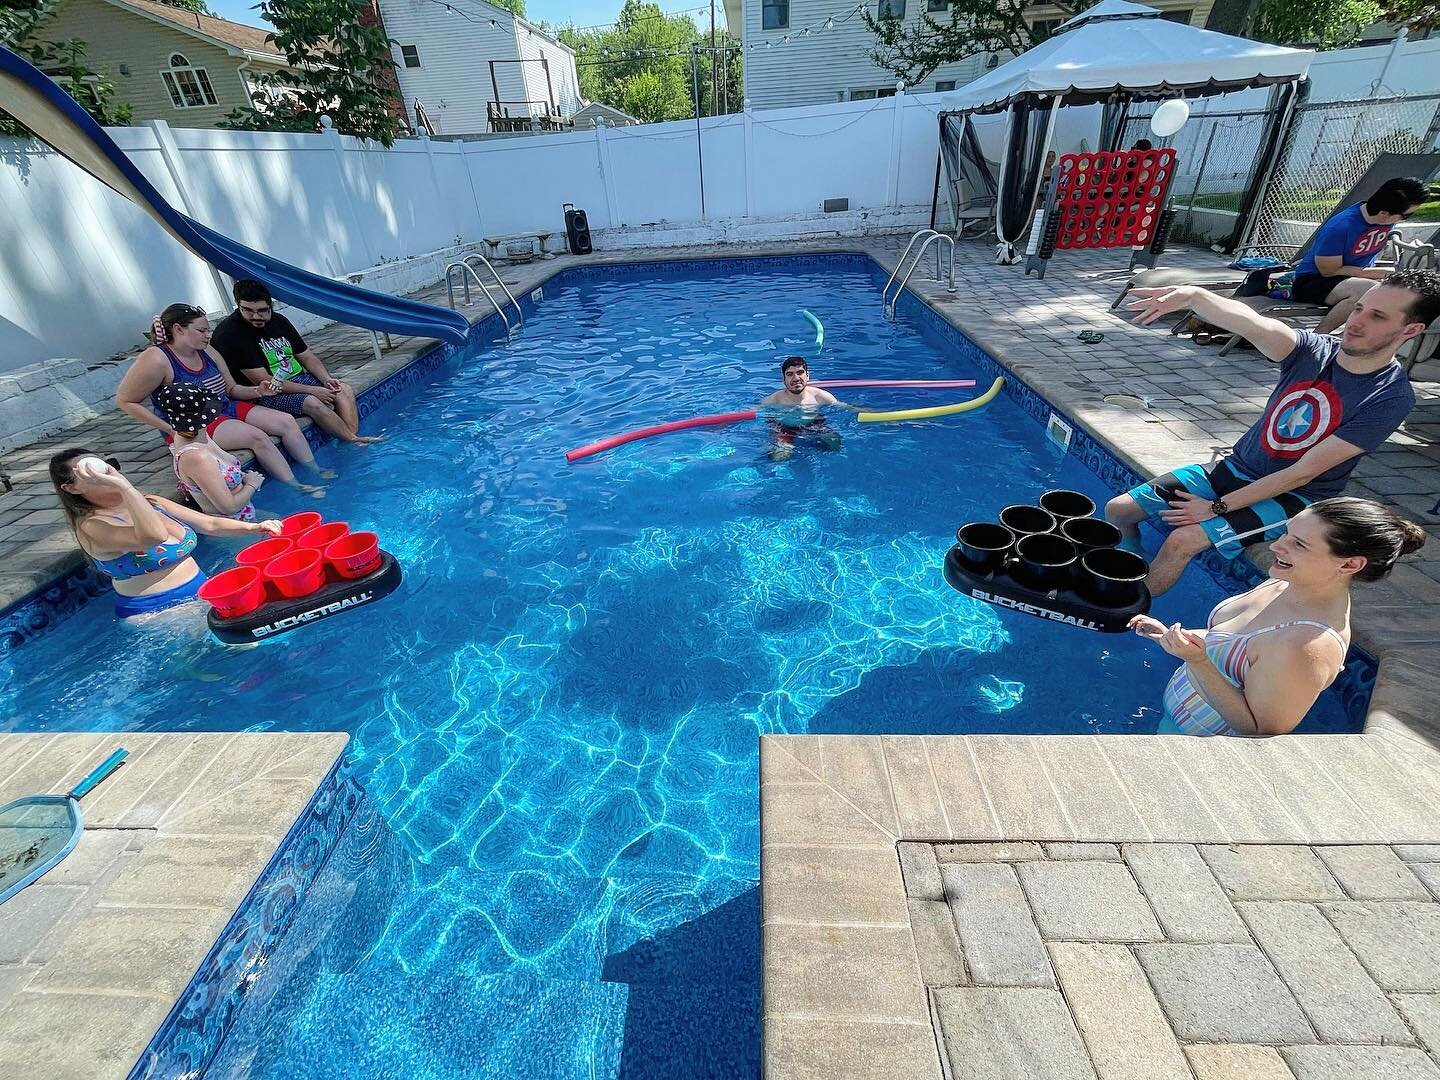 Rent our Party Games for your next gathering or event! Pickup or Delivery available! Bucket Pong, Giant Connect 4, Cornhole, Portable Party Speaker &amp; much More! #Xunbo #XunboRentals